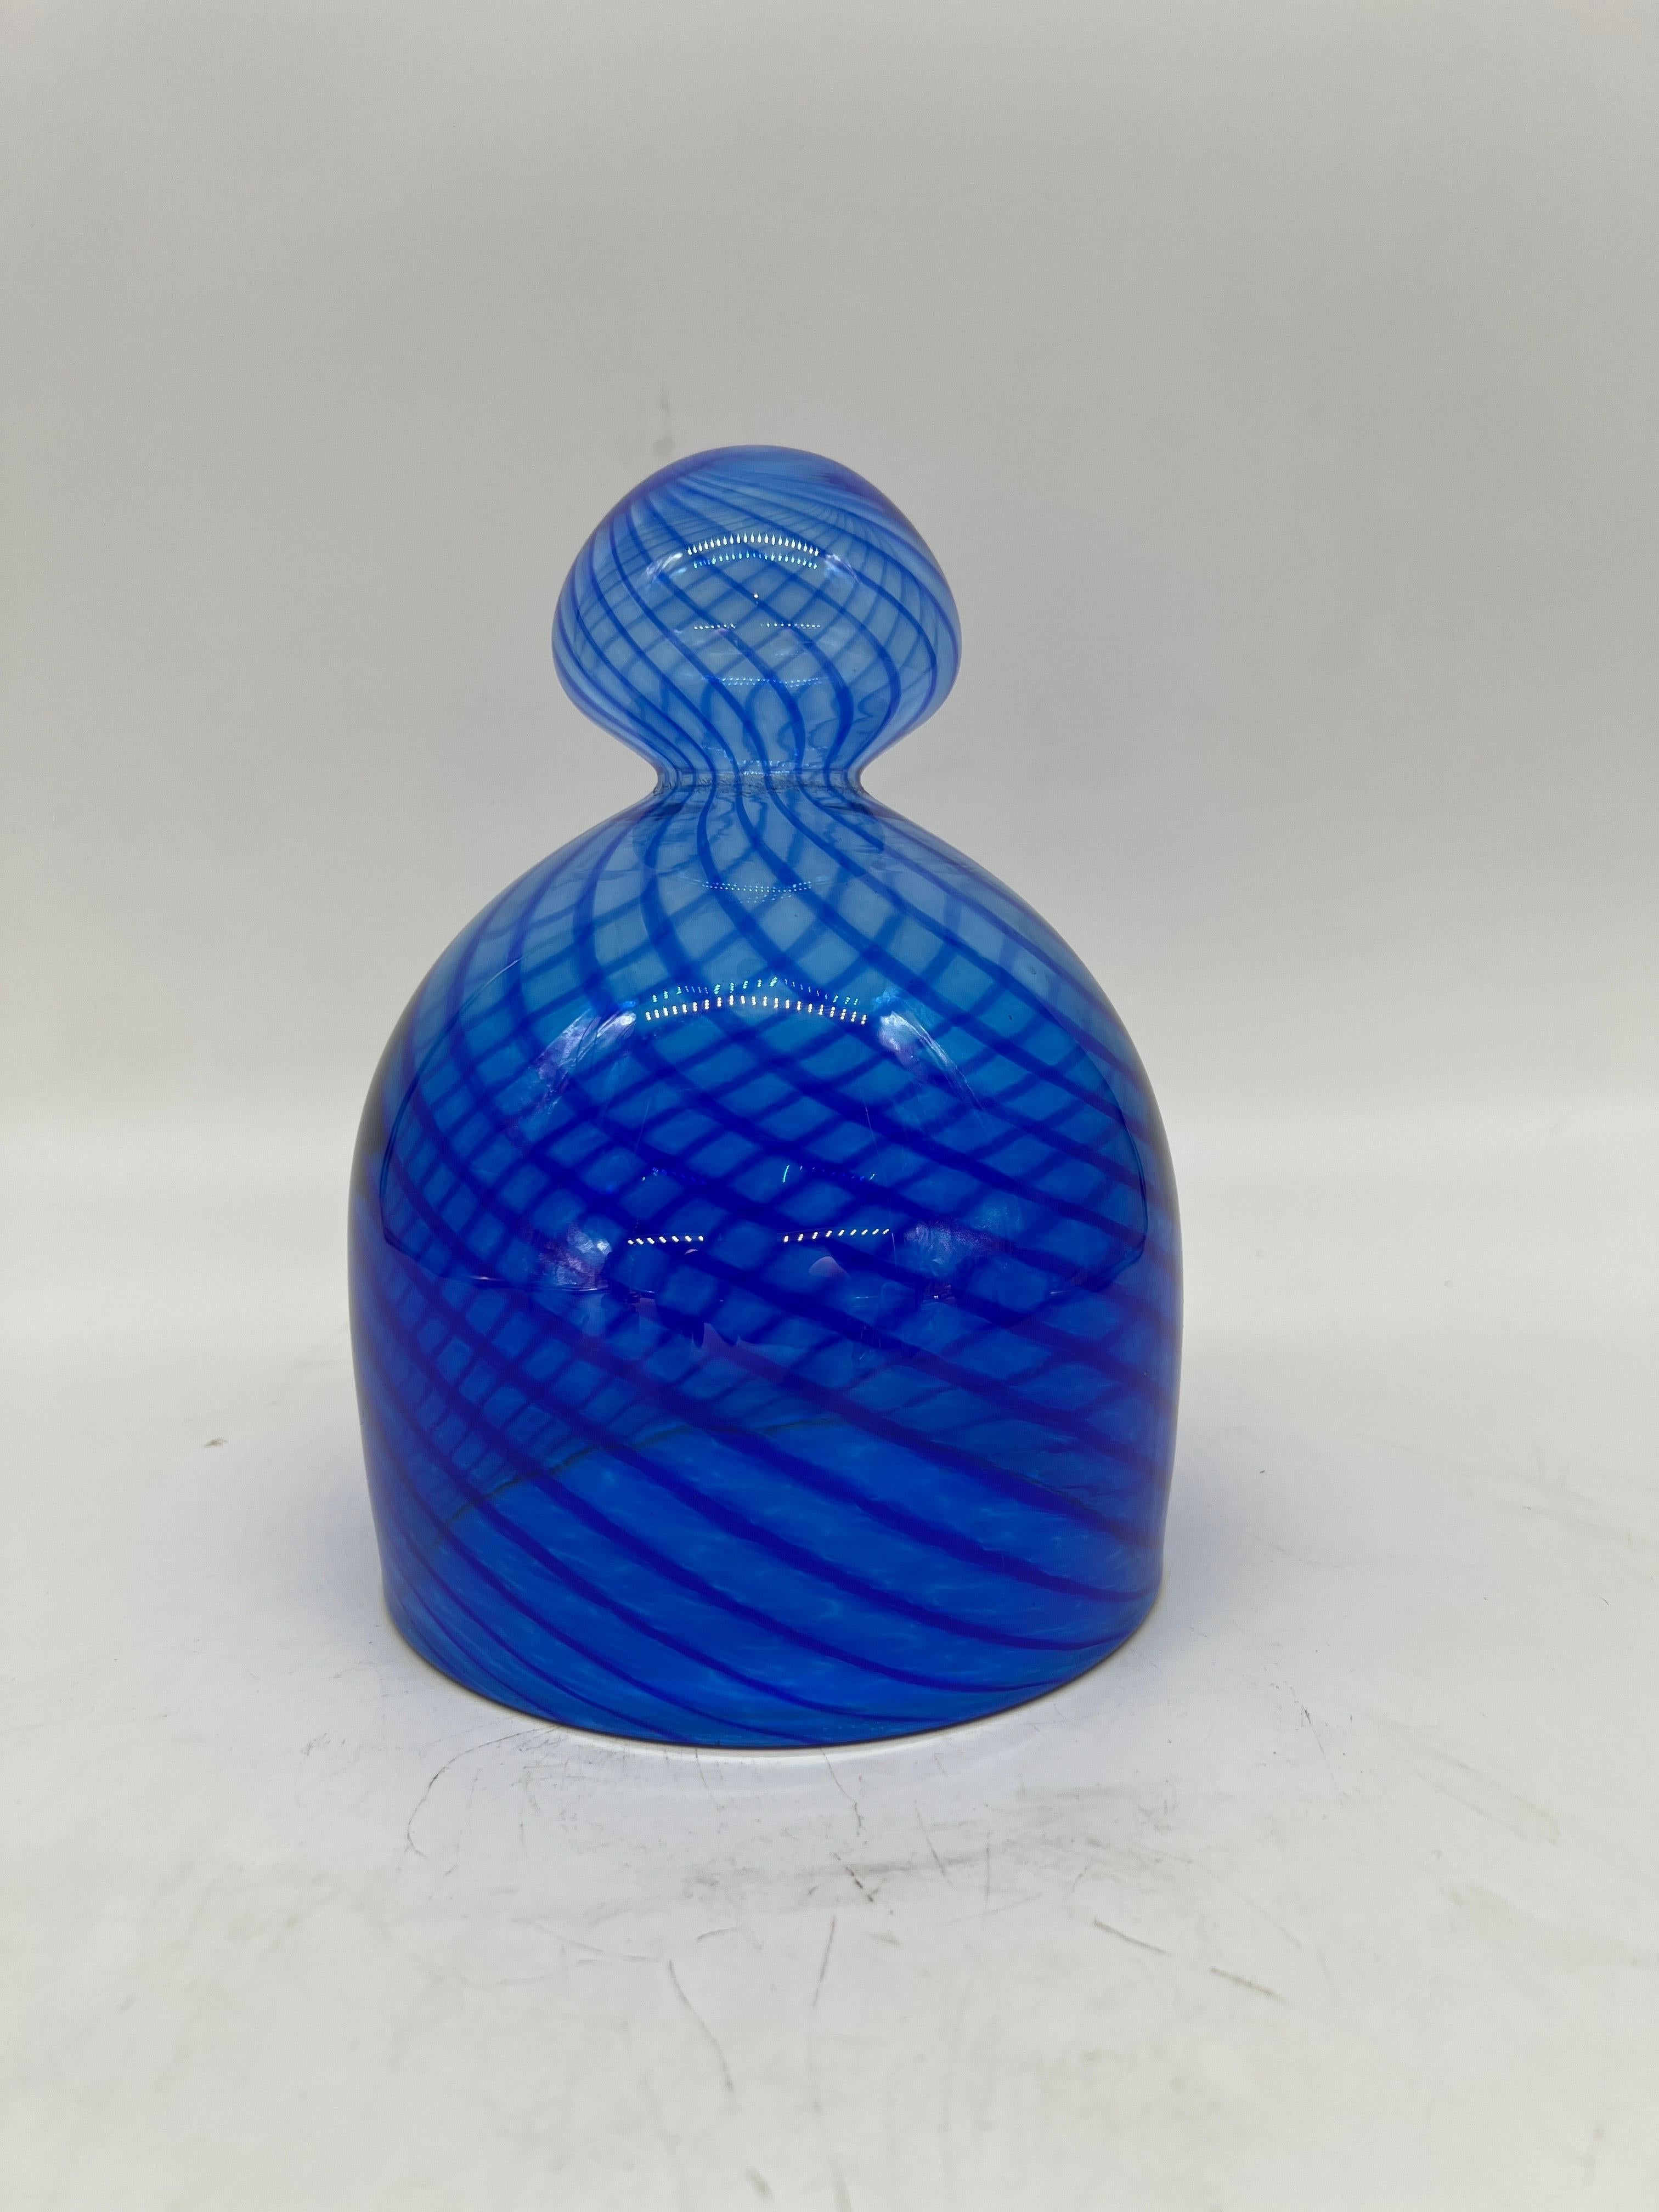 Venetian, 20th century.

A wonderful blue art glass dome with a reticello design. Thick quality artisan made. Unknown maker.